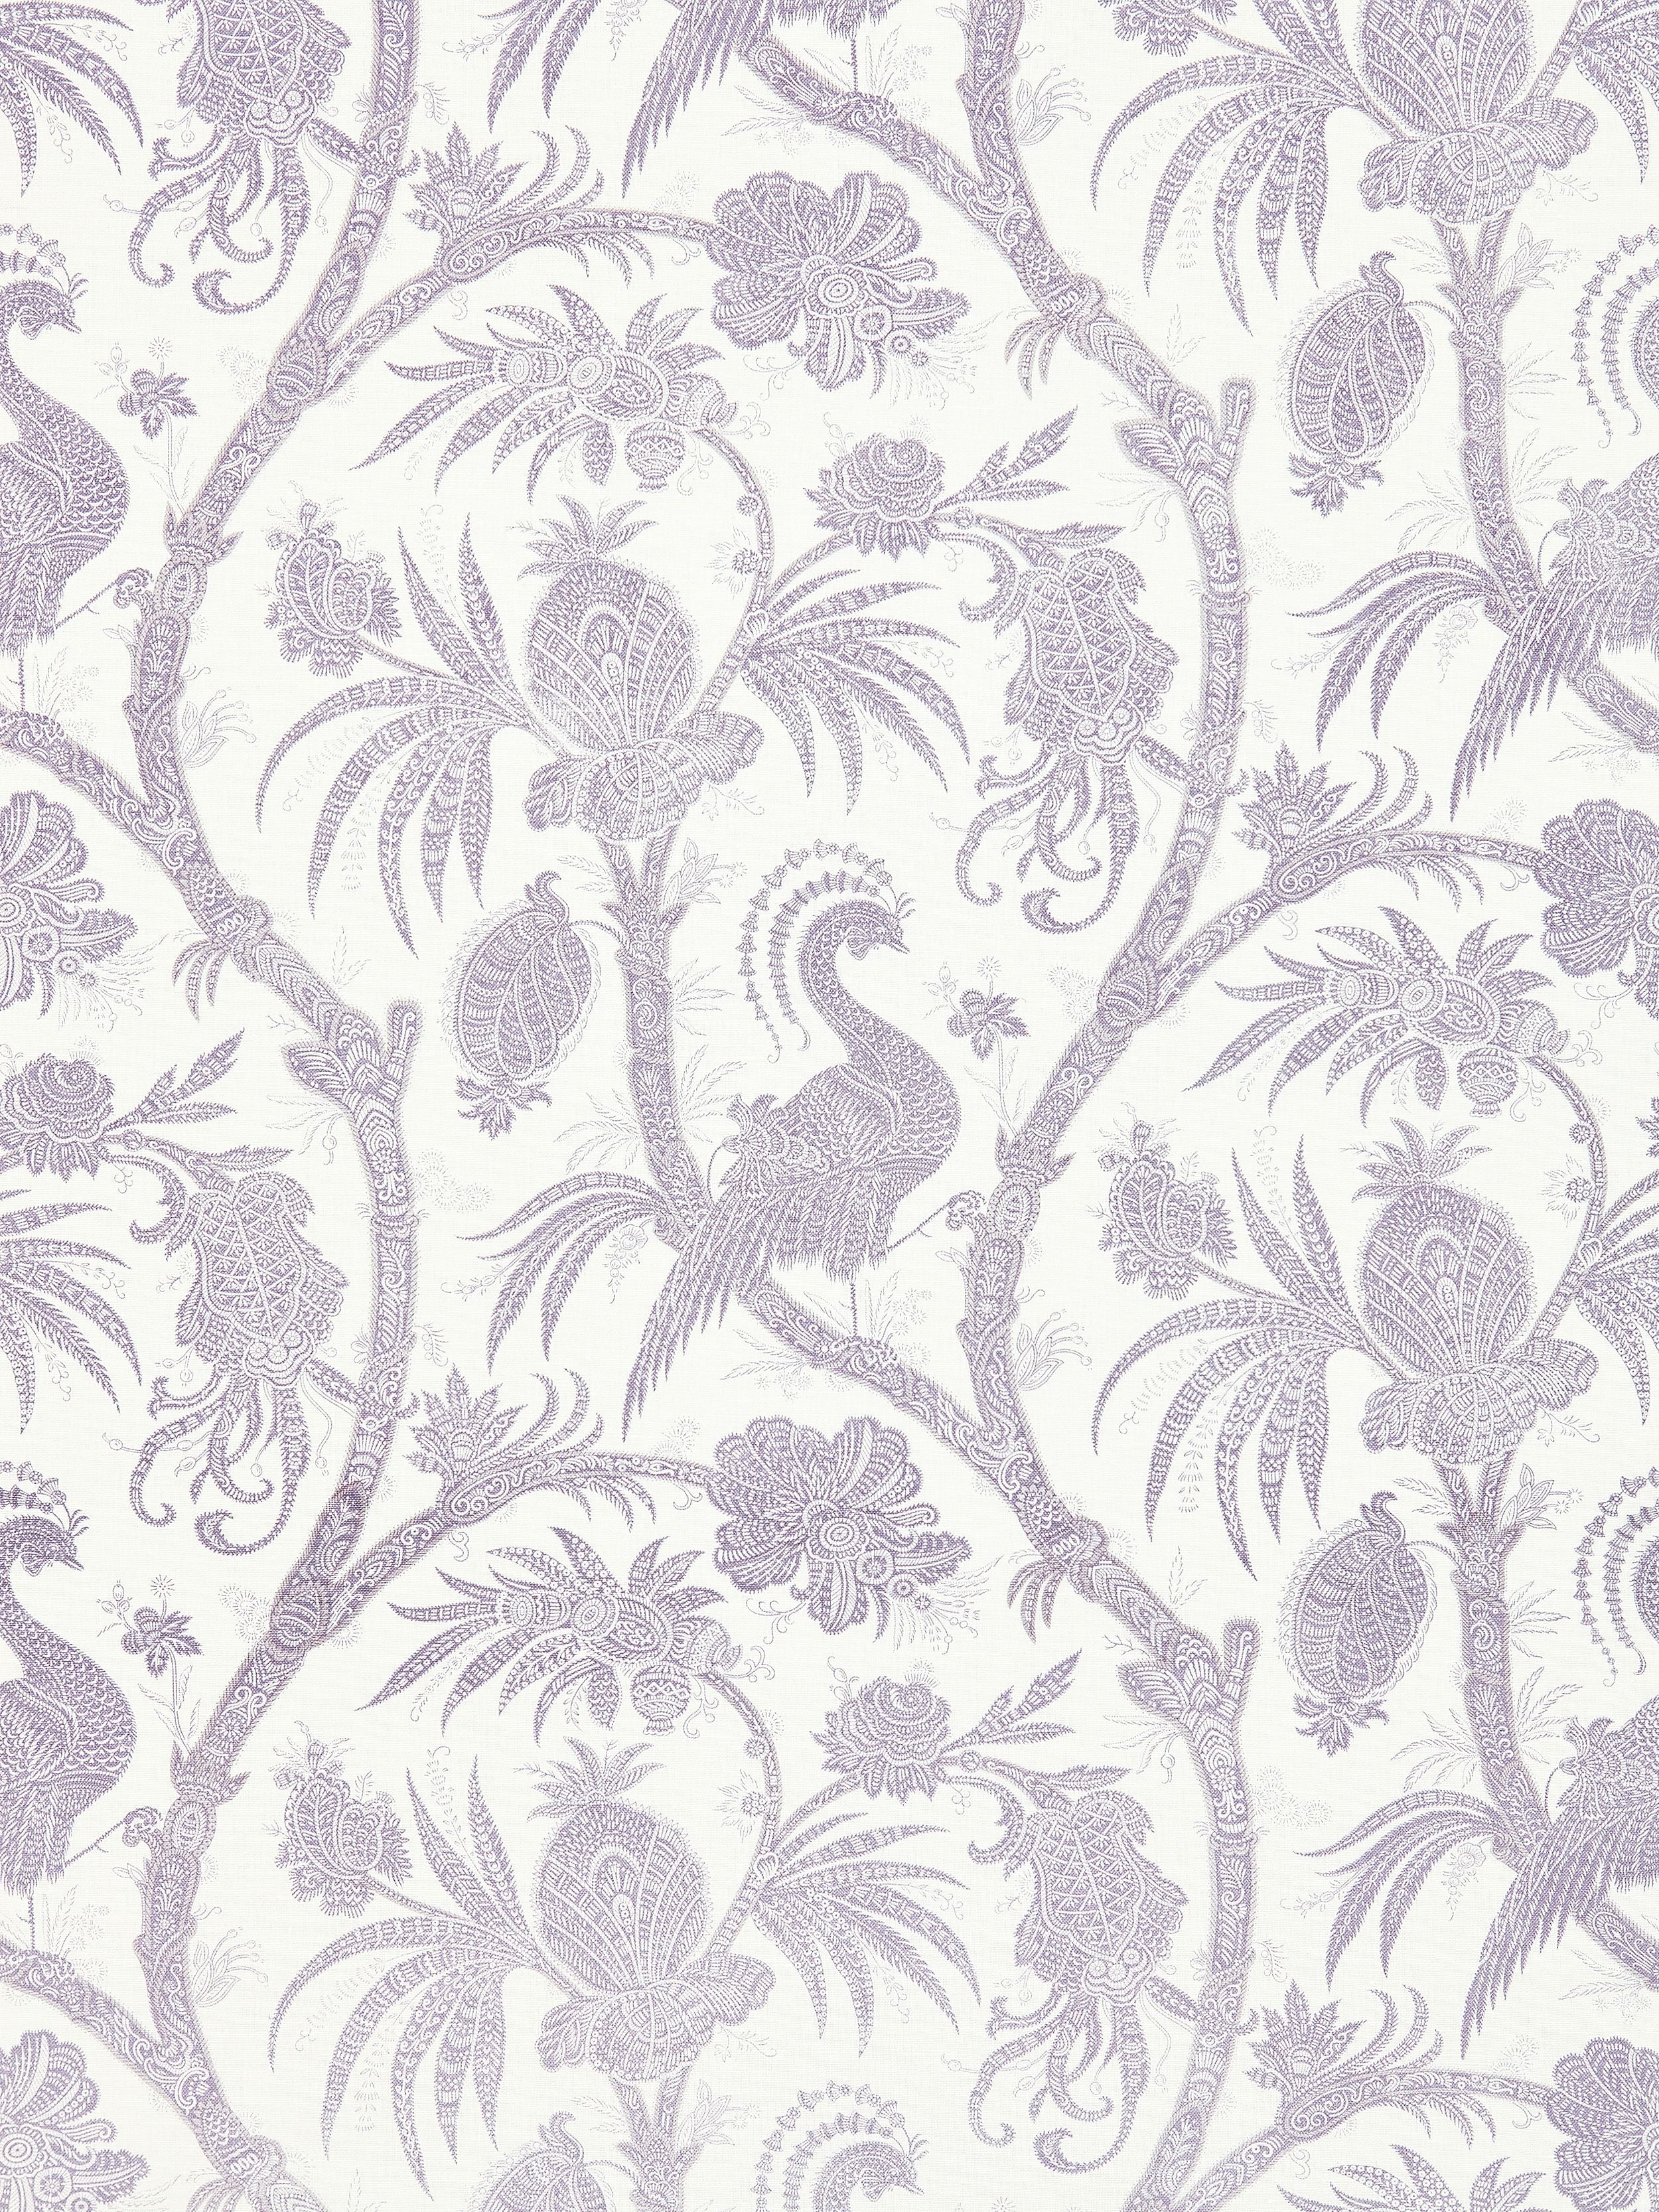 Balinese Peacock Linen Print fabric in lavender color - pattern number SC 000216575 - by Scalamandre in the Scalamandre Fabrics Book 1 collection